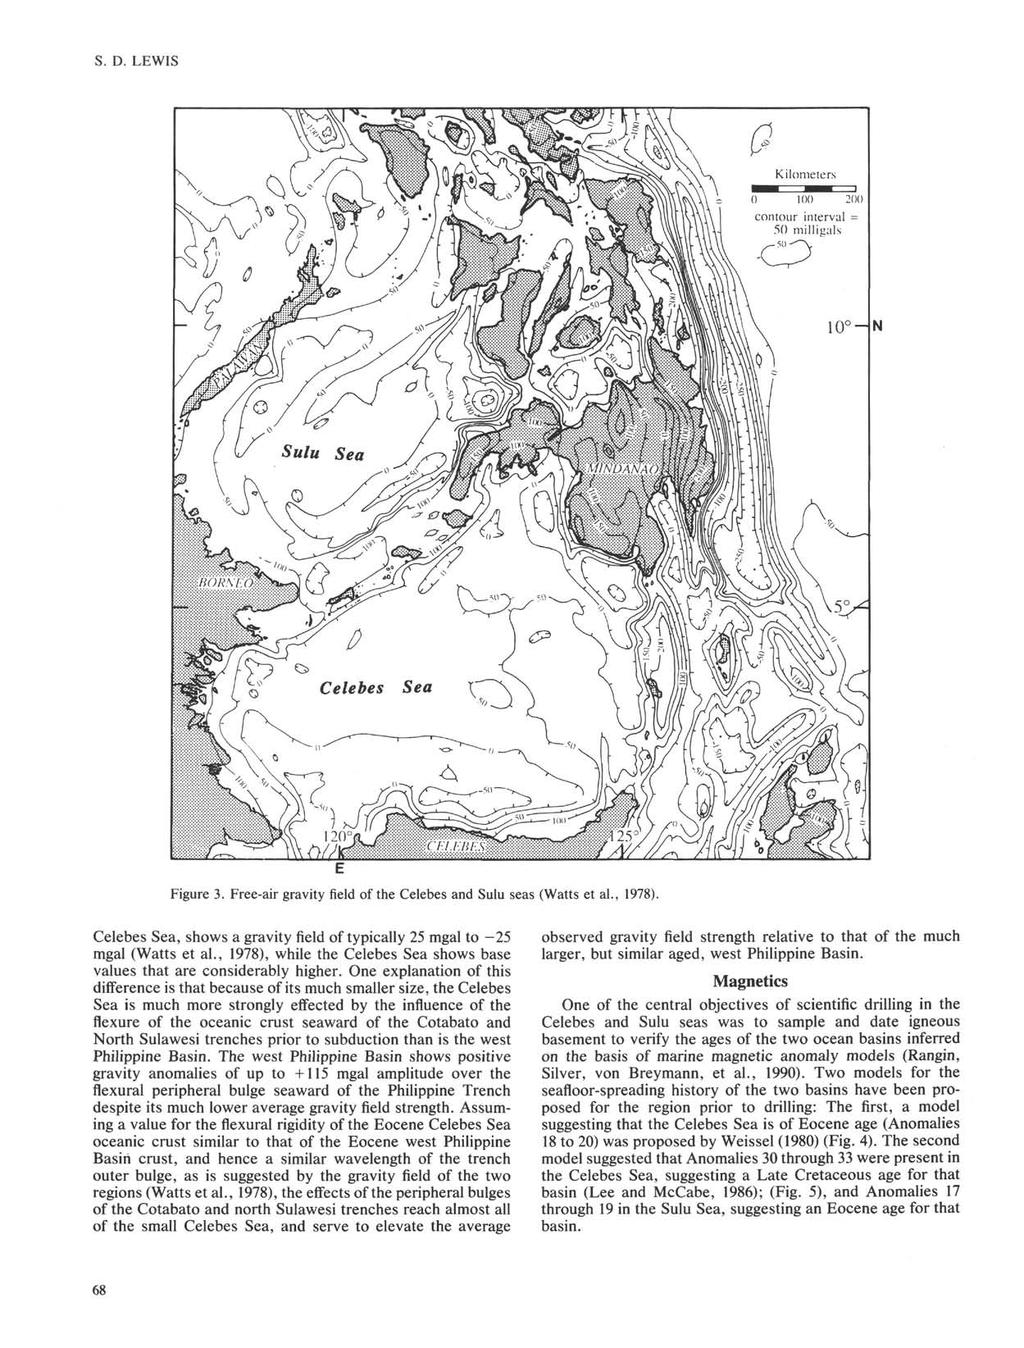 S. D. LEWIS Kilometers ) 100 200 contour interval = 50 milligals Figure 3. Free-air gravity field of the Celebes and Sulu seas (Watts et al., 1978).